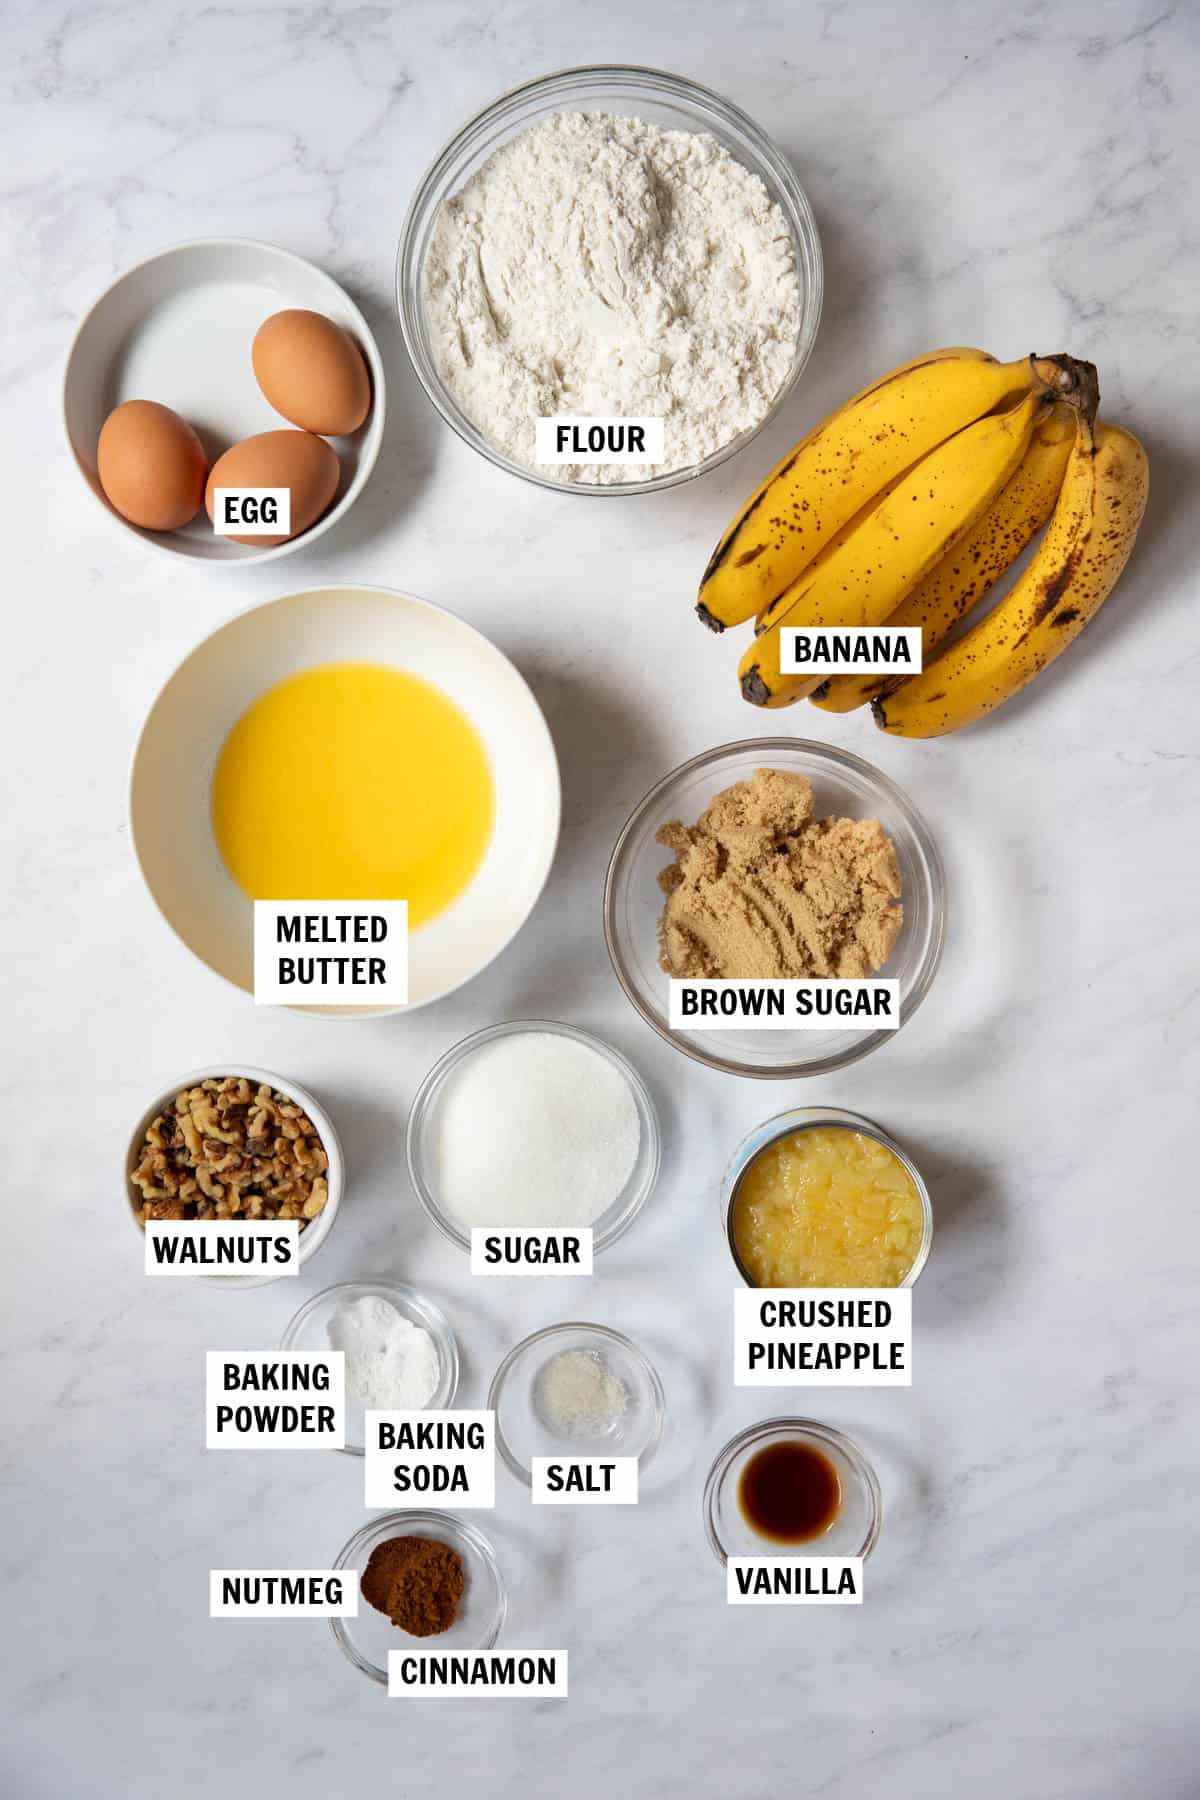 All of the ingredients for pineapple banana bread on a white countertop in bowls including flour, eggs, butter, bananas, sugar, pineapple, walnuts, baking powder and baking soda, cinnamon, nutmeg and vanilla.